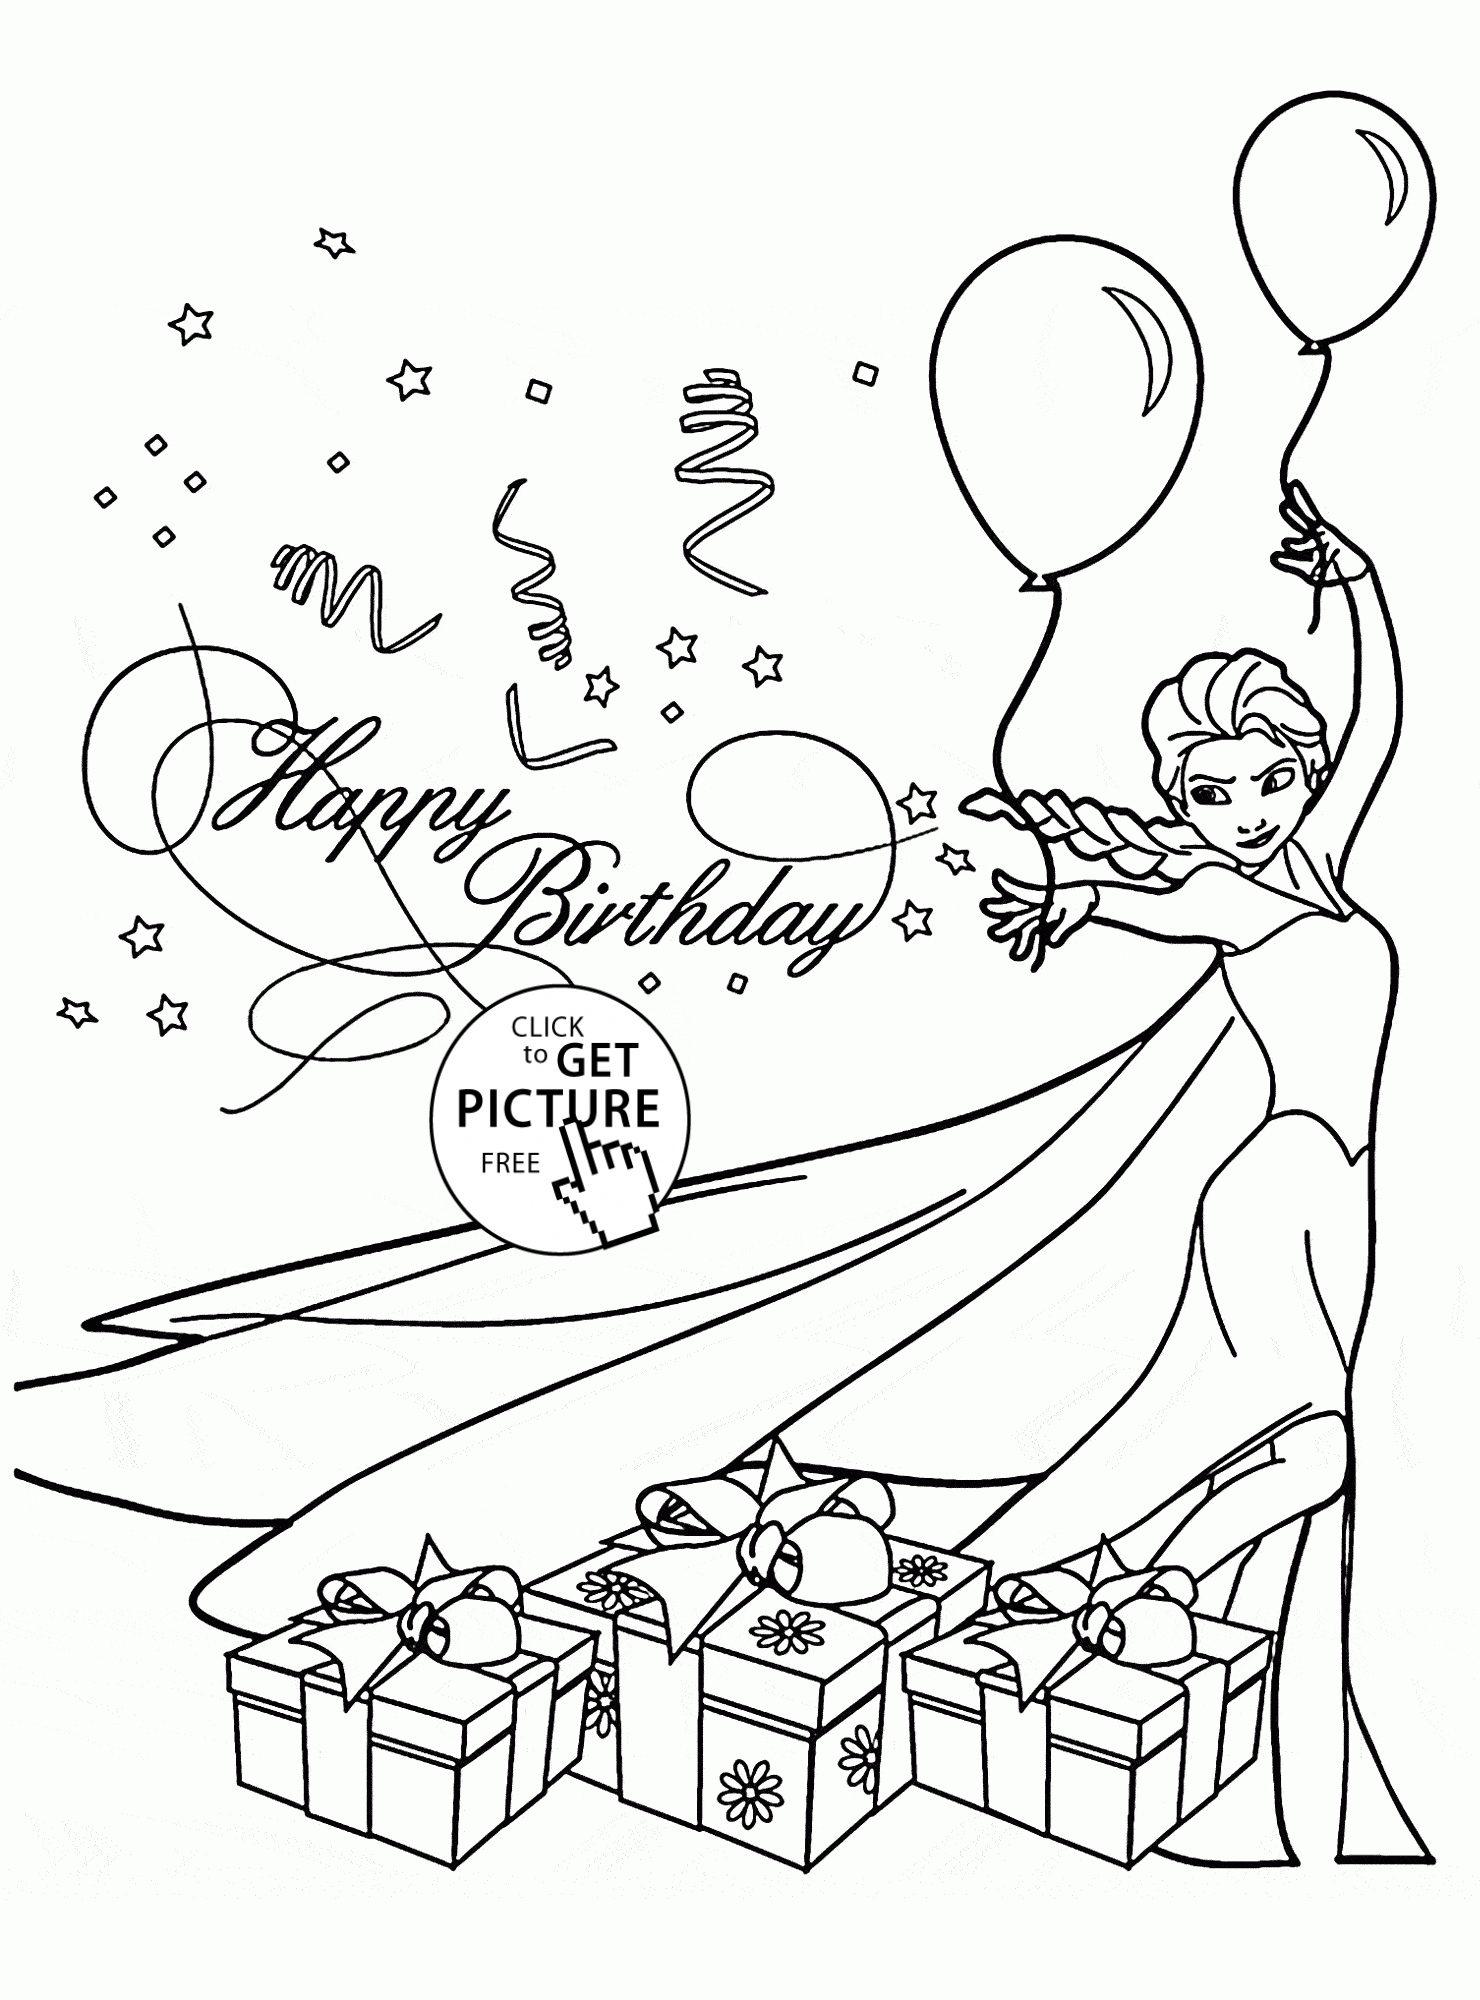 birthday-card-coloring-page-at-getcolorings-free-printable-colorings-pages-to-print-and-color